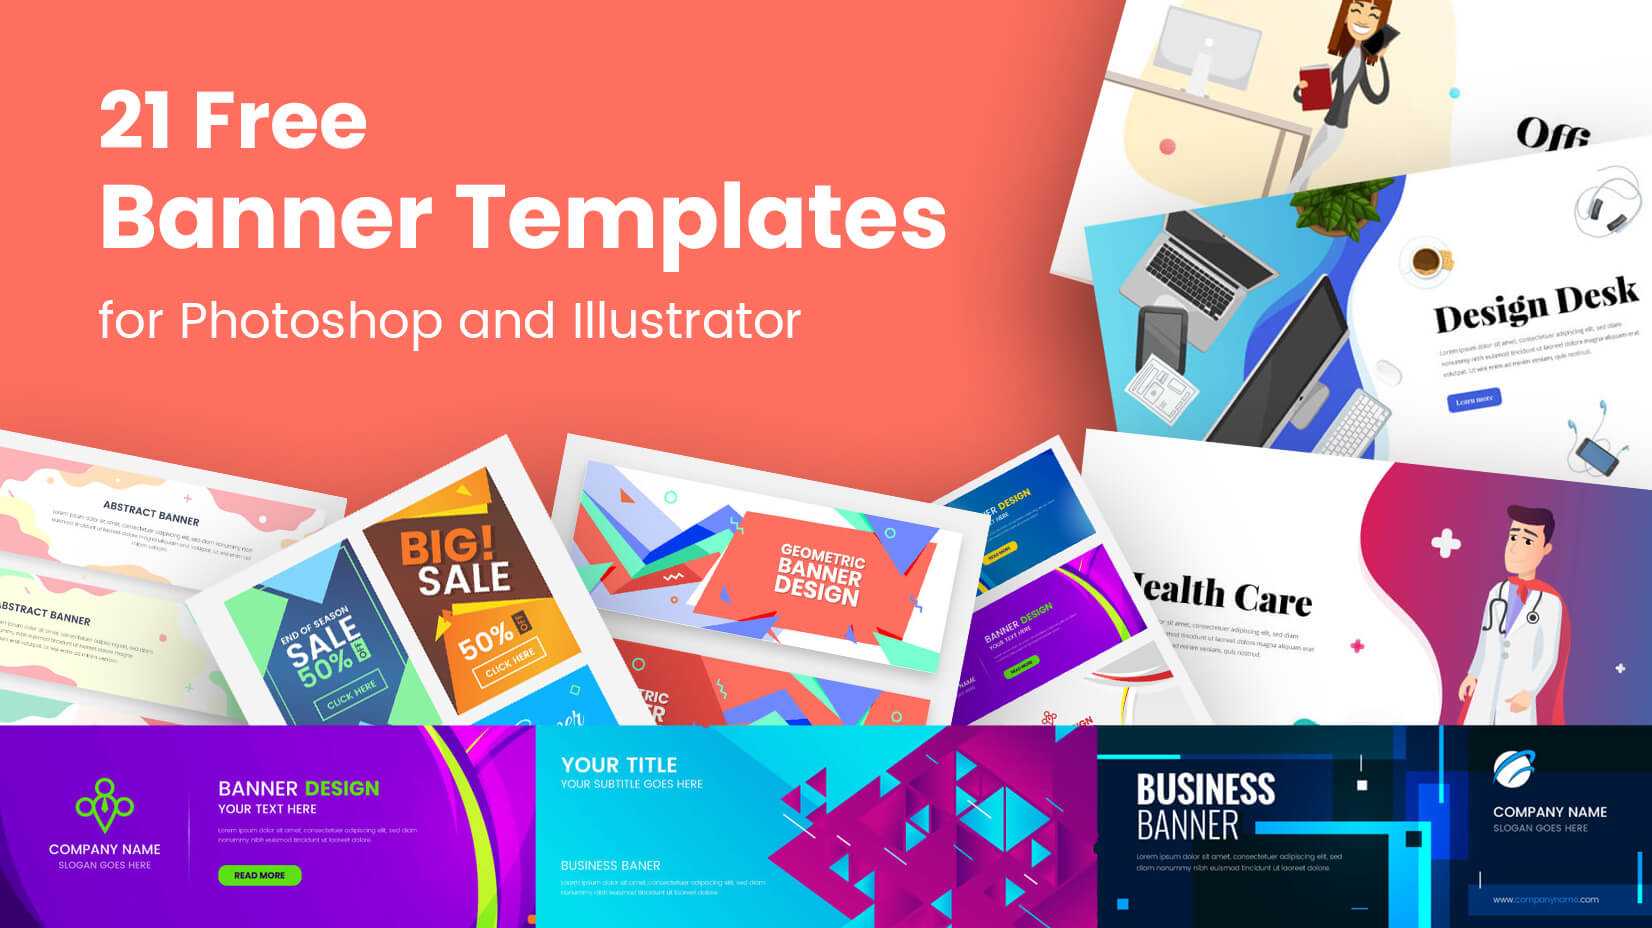 21 Free Banner Templates For Photoshop And Illustrator For Adobe Photoshop Banner Templates